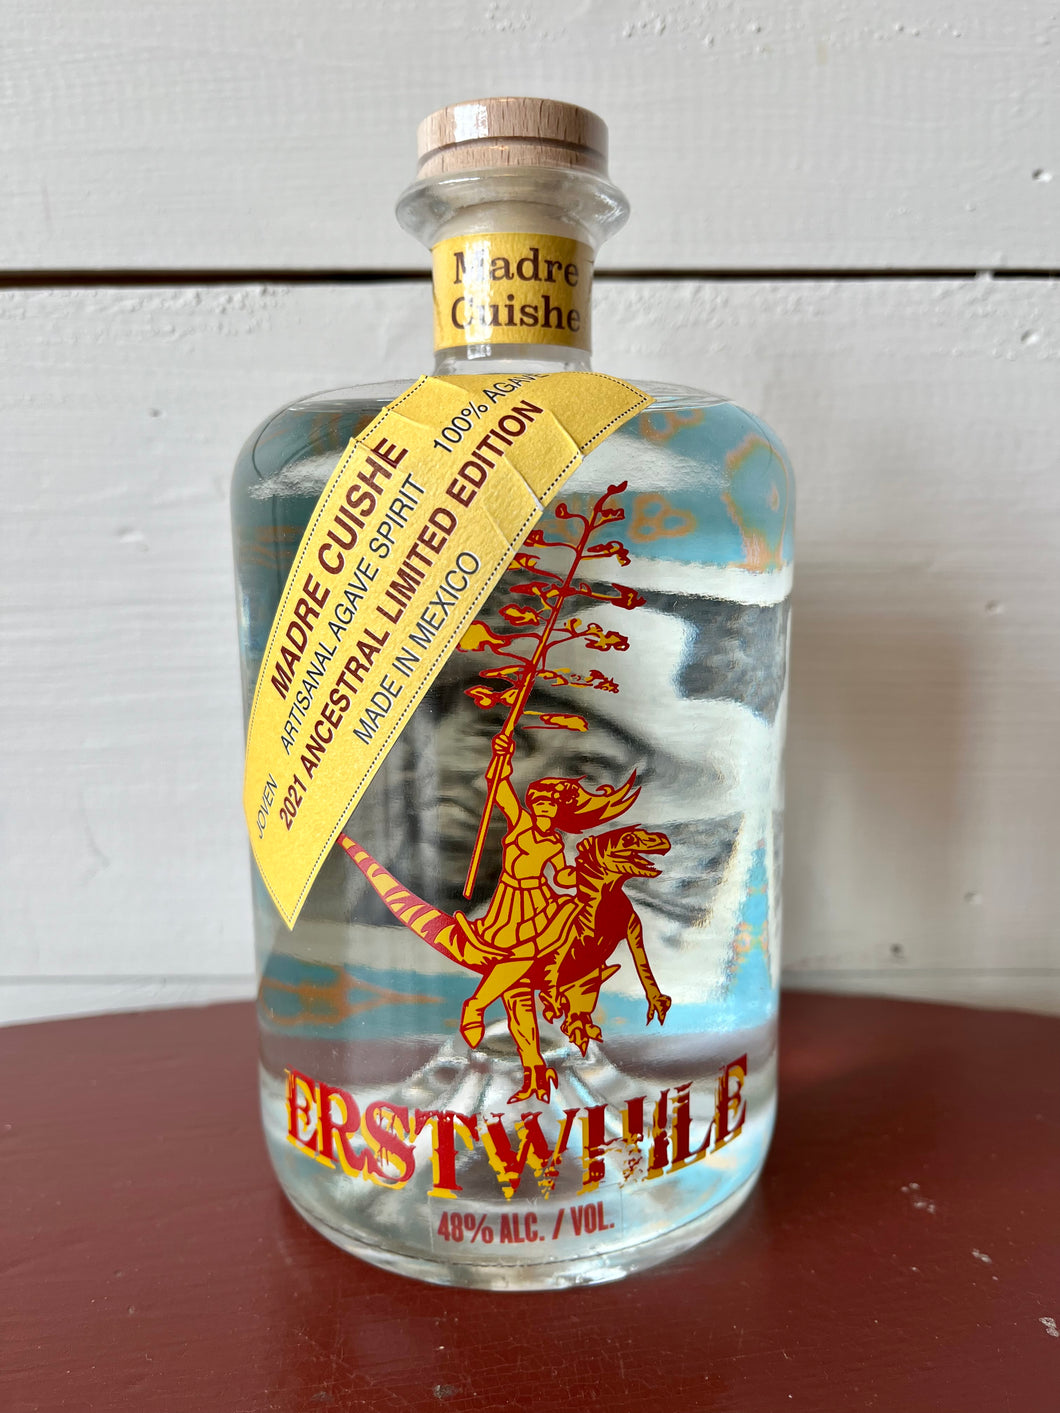 Erstwhile Mezcal Madre Cuishe 2021